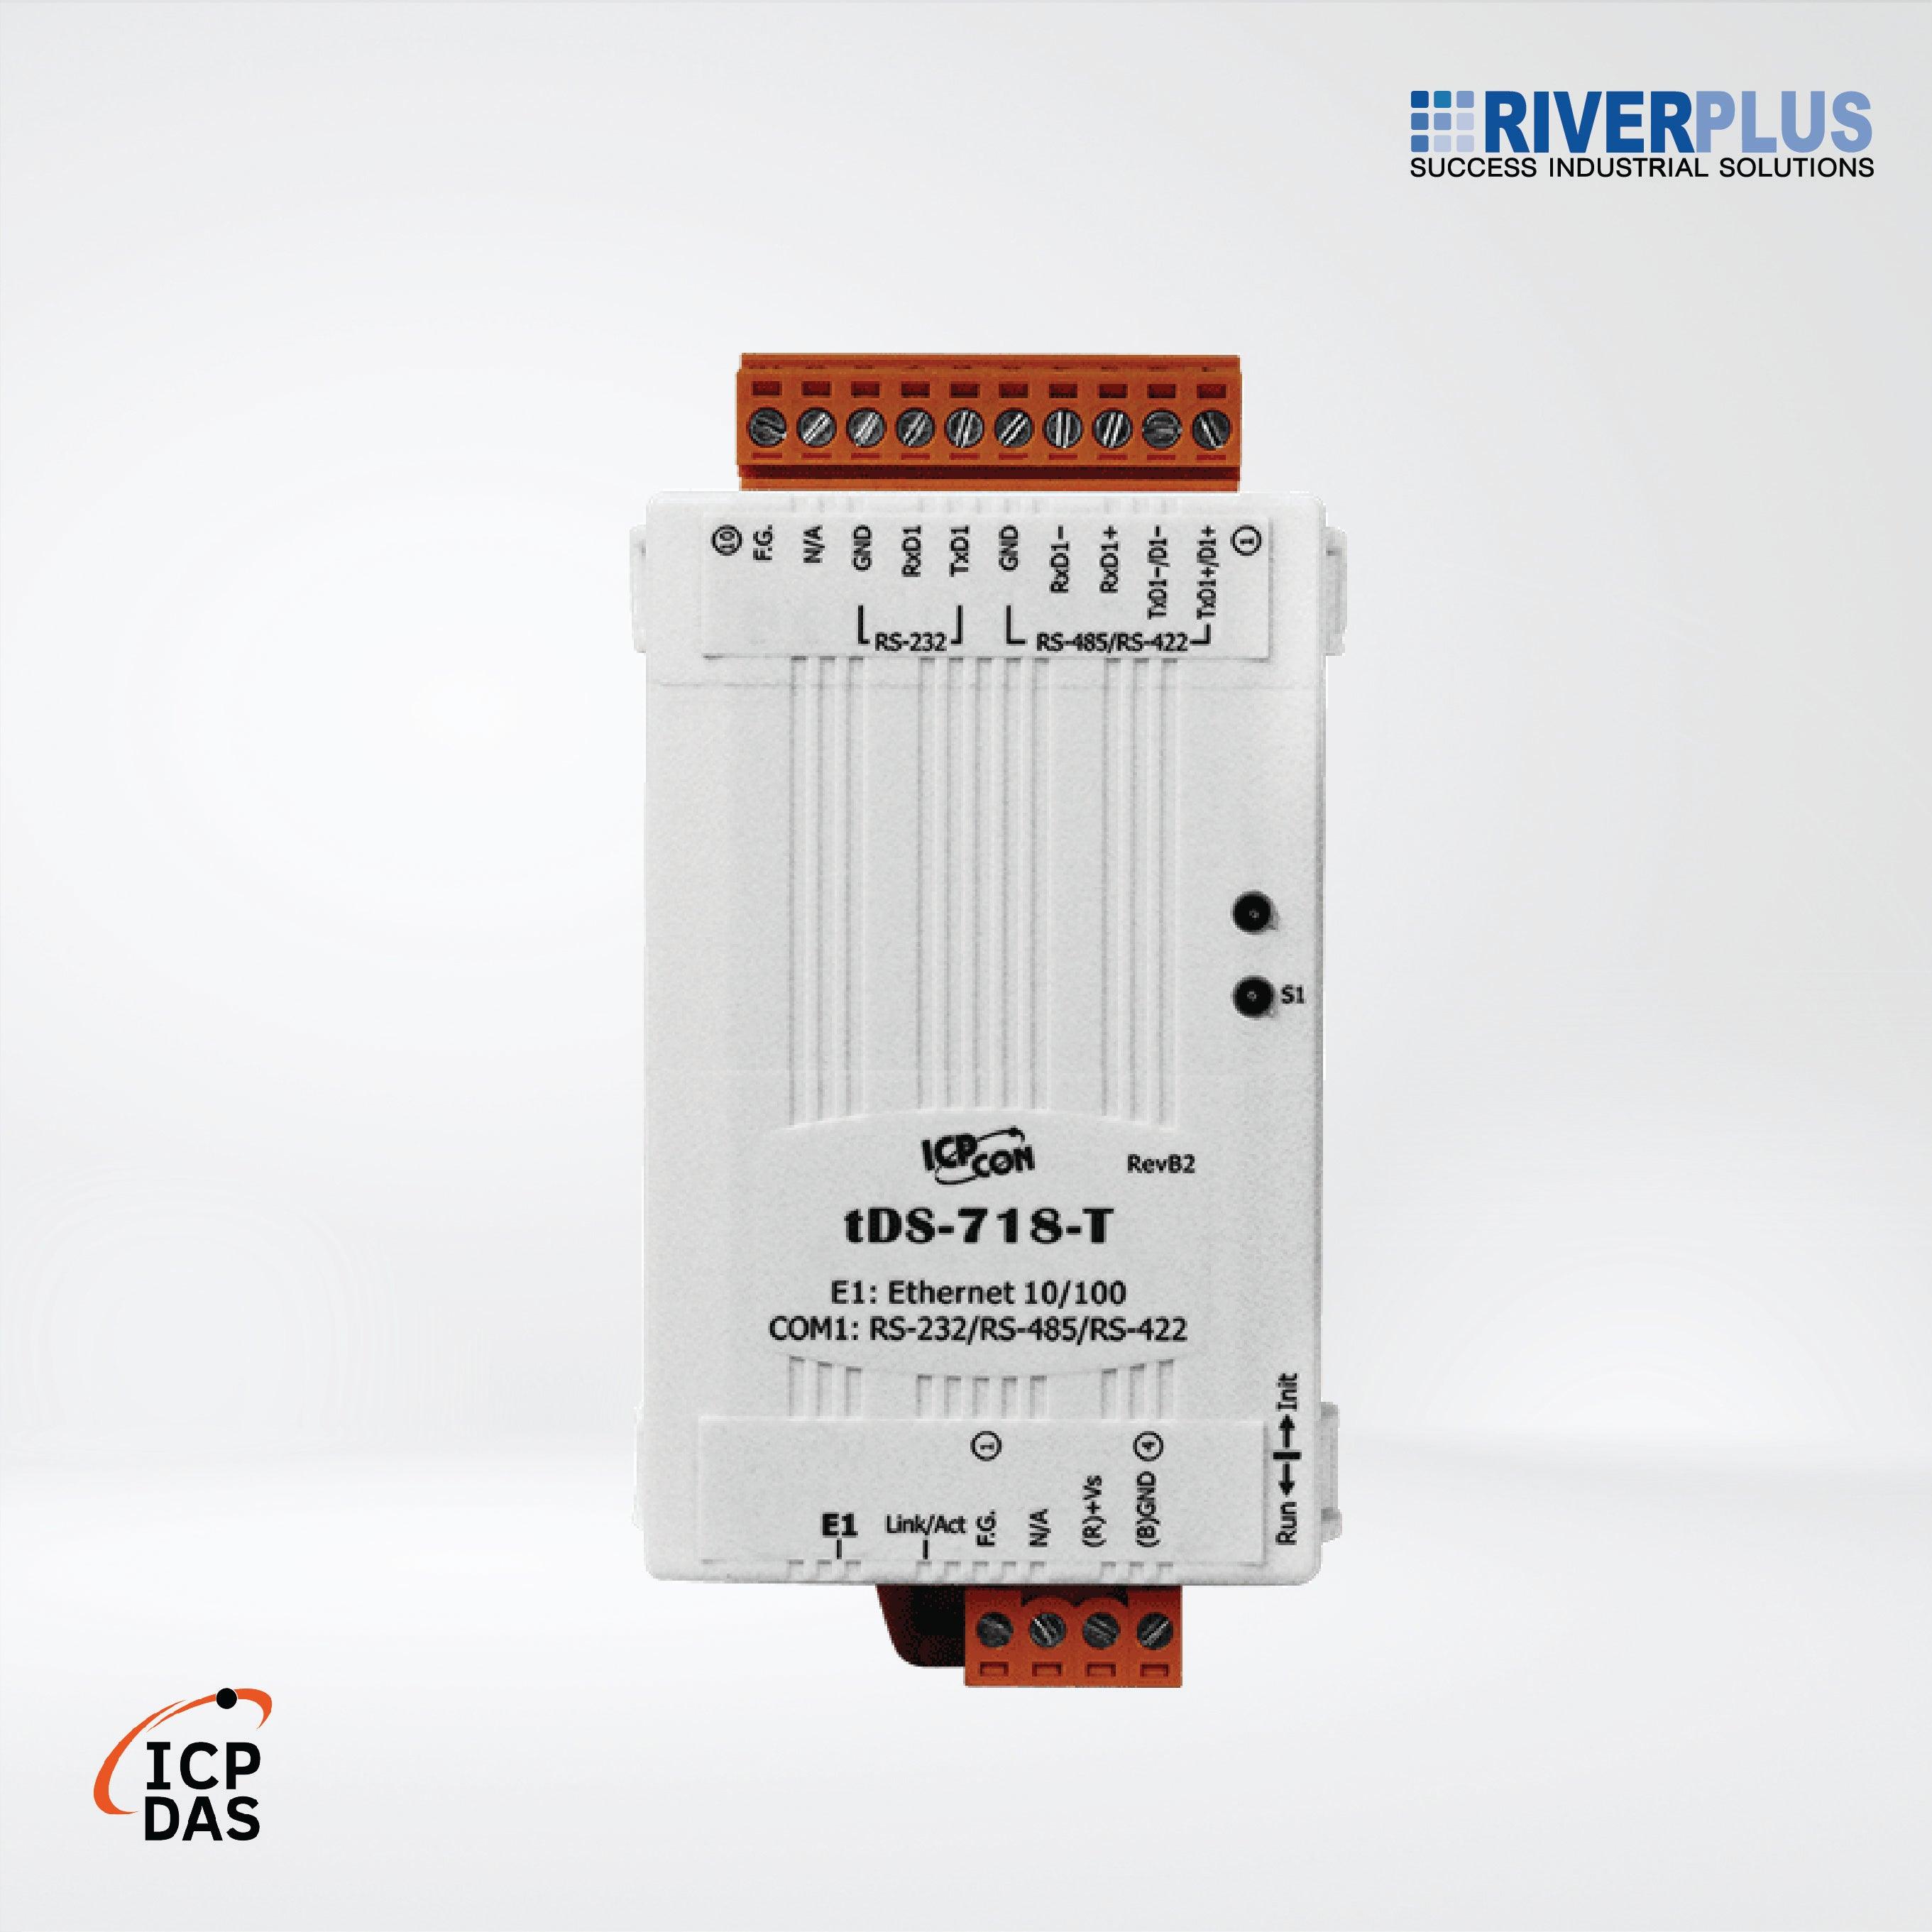 tDS-718-T CR Tiny (1x RS-232/422/485) Serial-to-Ethernet Device Server (Terminal Block Power Input) - Riverplus